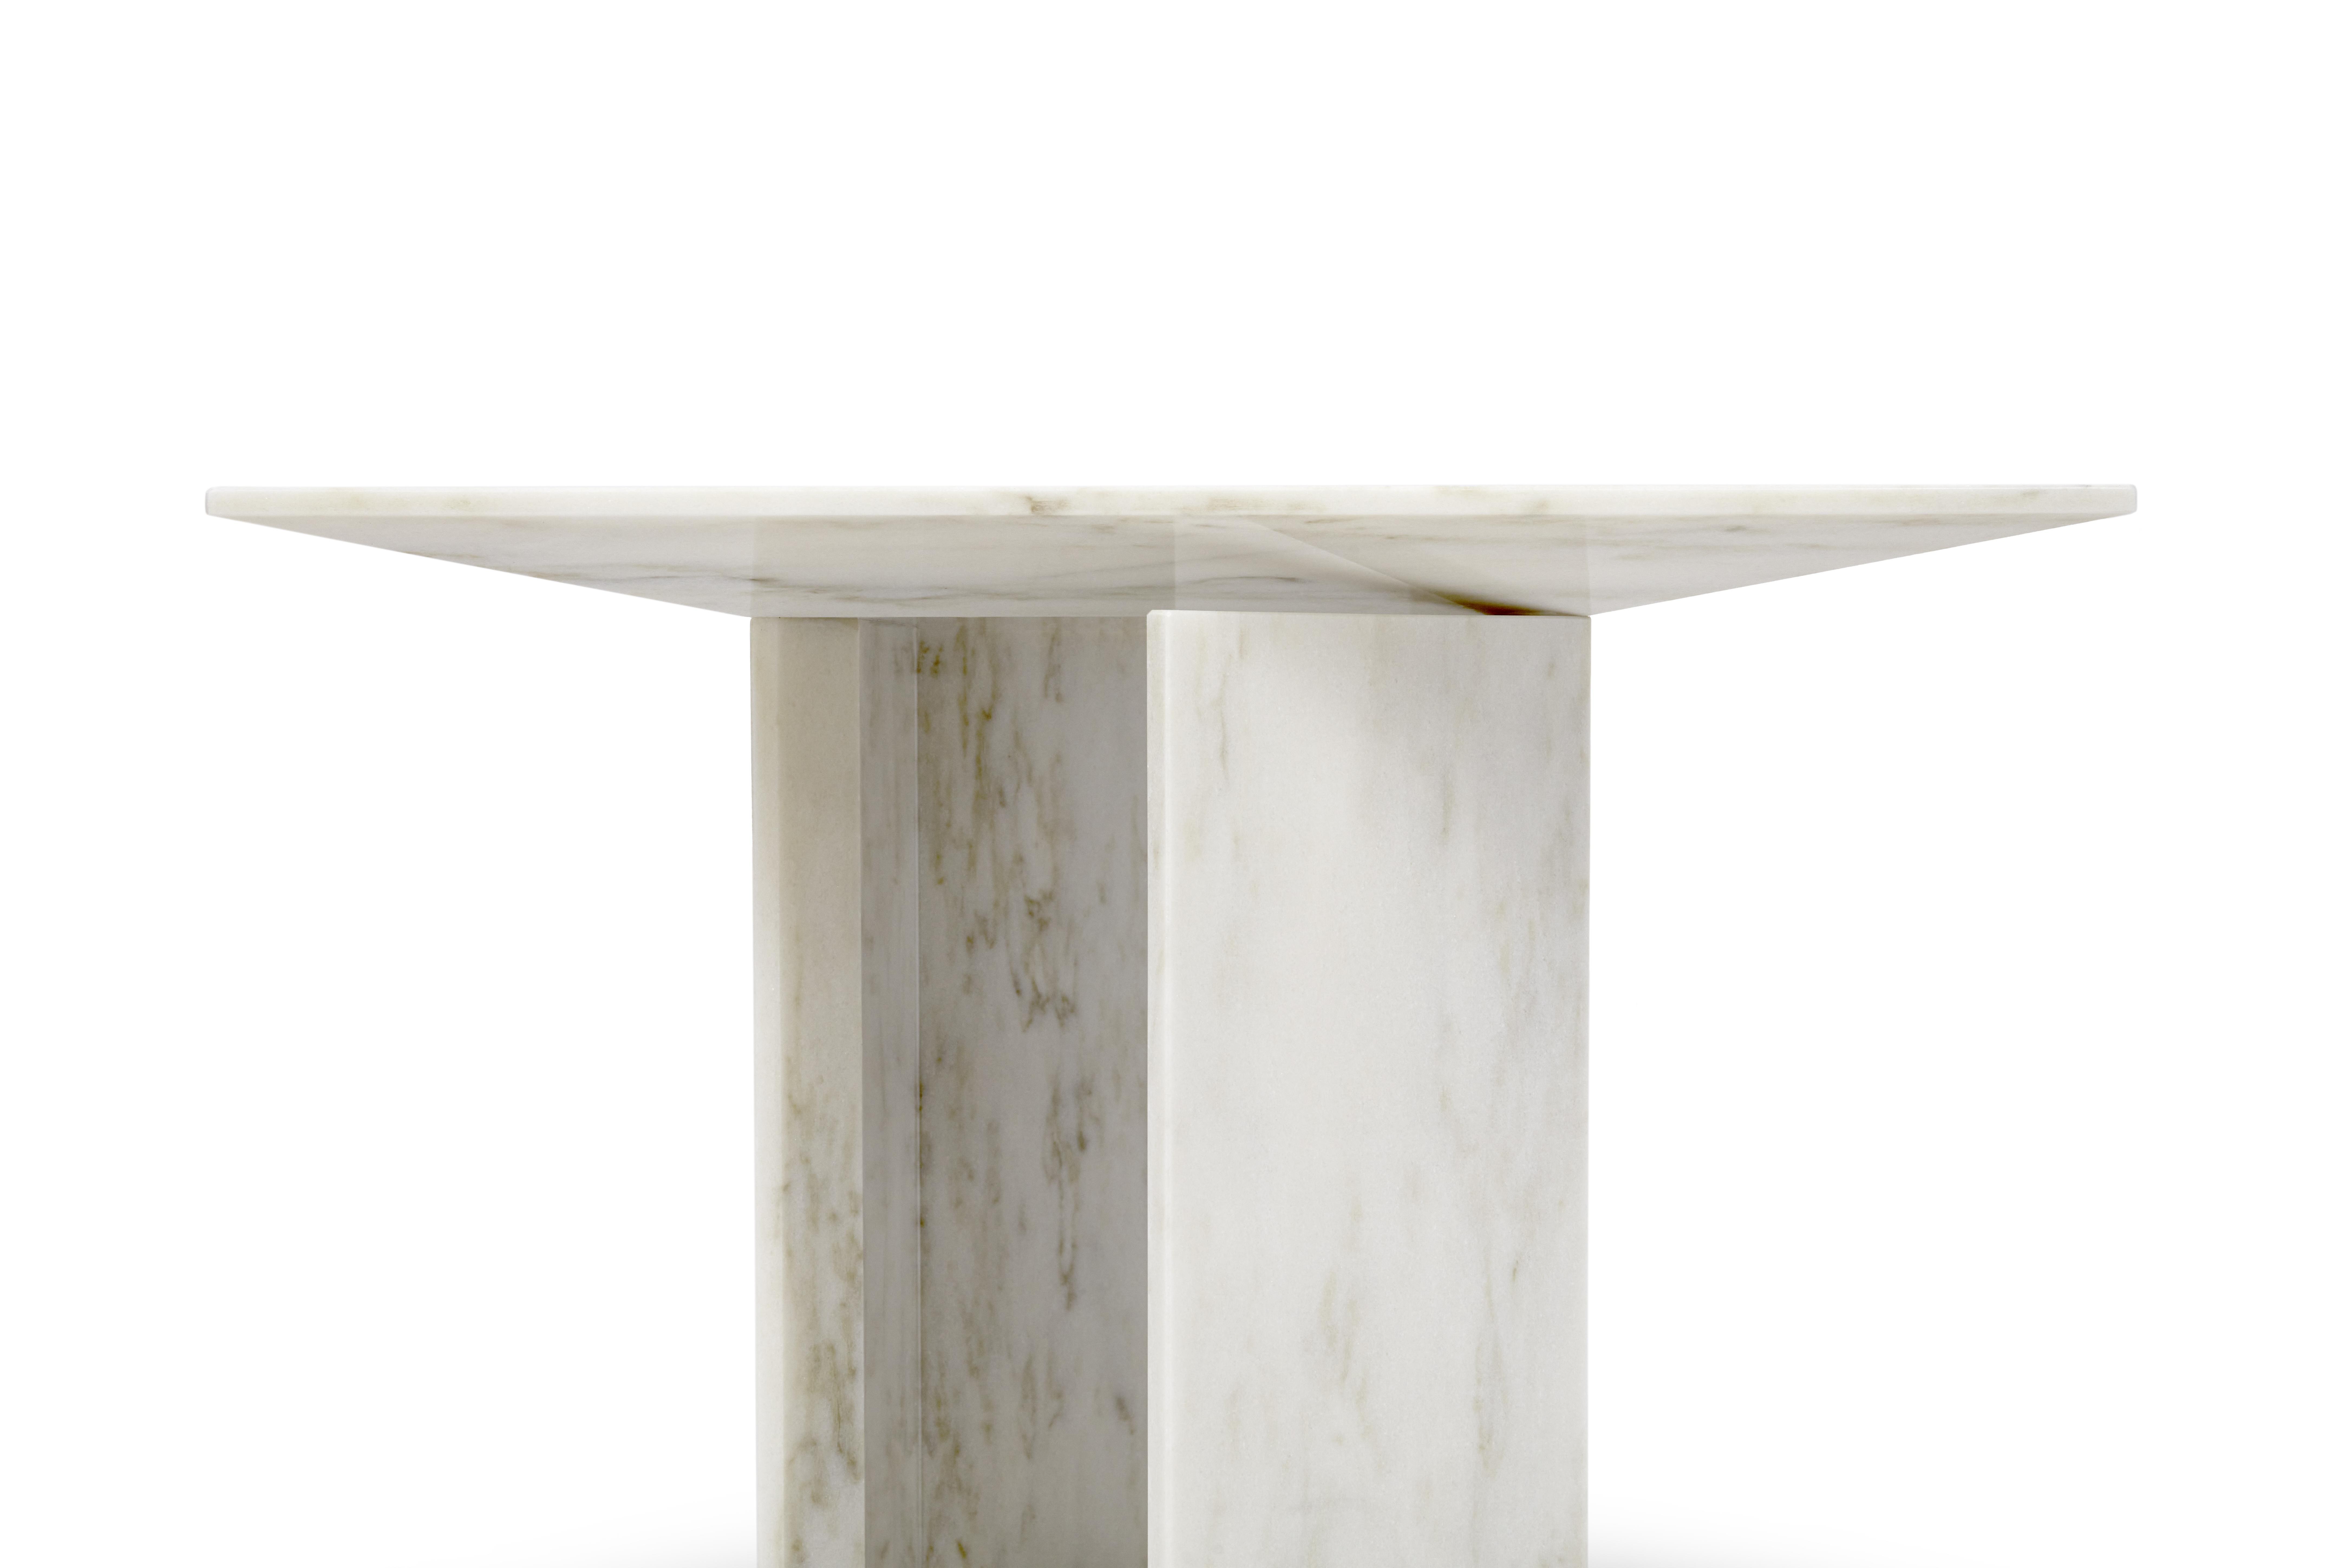 Theorem side table by Marta Delgado Studio

Contemporary side table

Model on the picture:
Marble: Estremoz

Dimensions:
Width: 23.6” 60 cm 
Depth: 23.6” 60 cm 
Height: 21.7” 55 cm

Marta Delgado is a Portuguese artist, she founded her